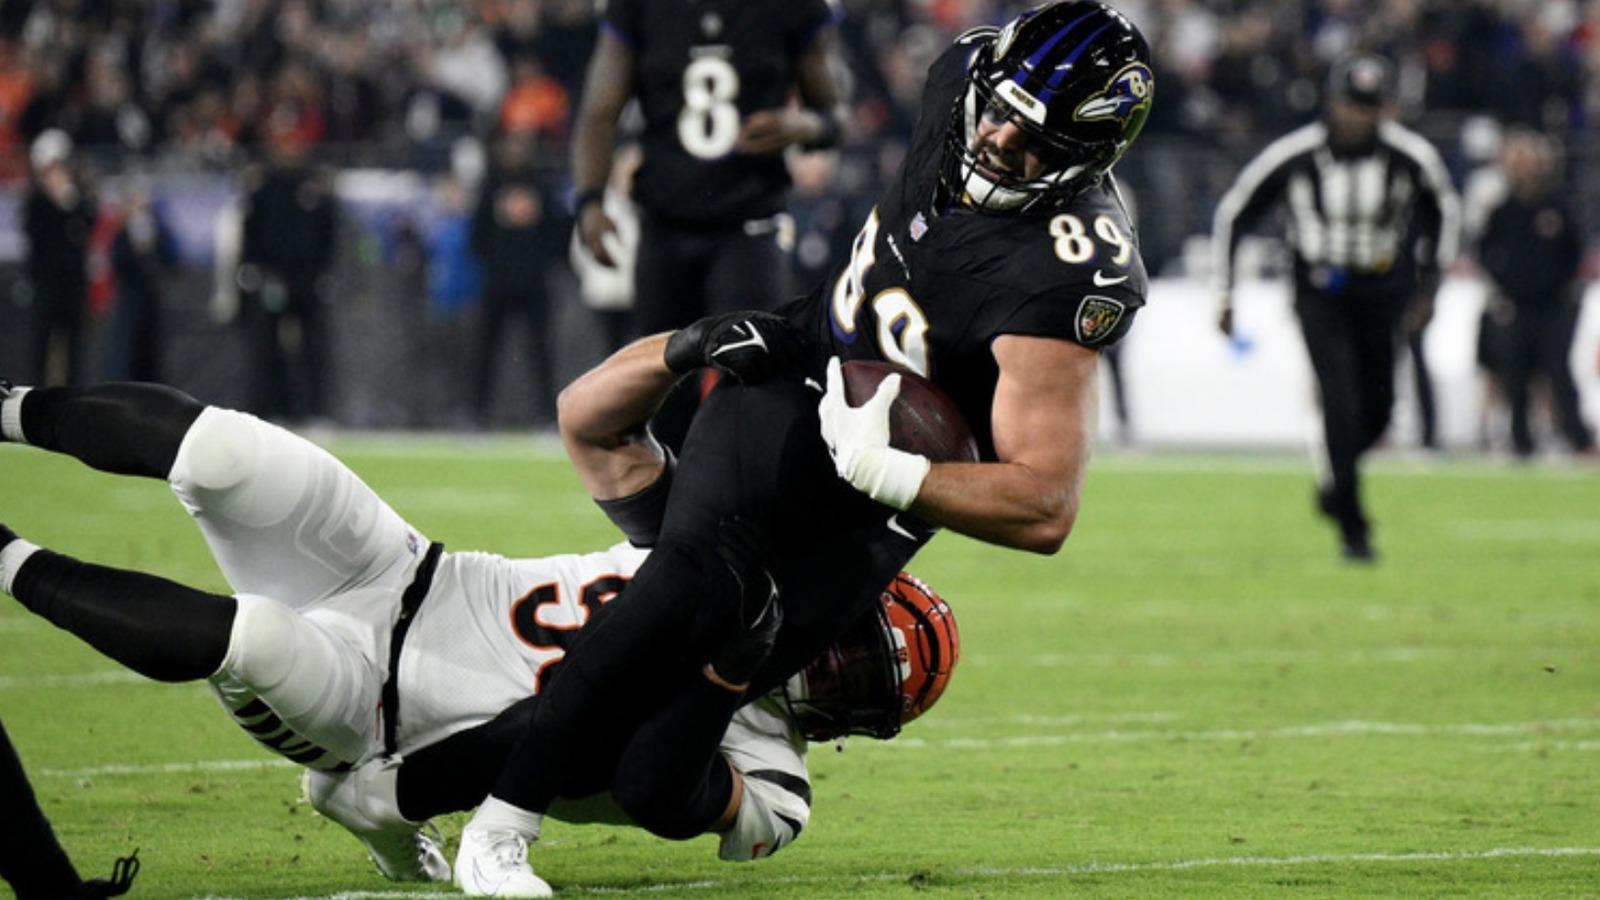 NFL fans and players are outraged over the league’s new hip-drop tackle rule